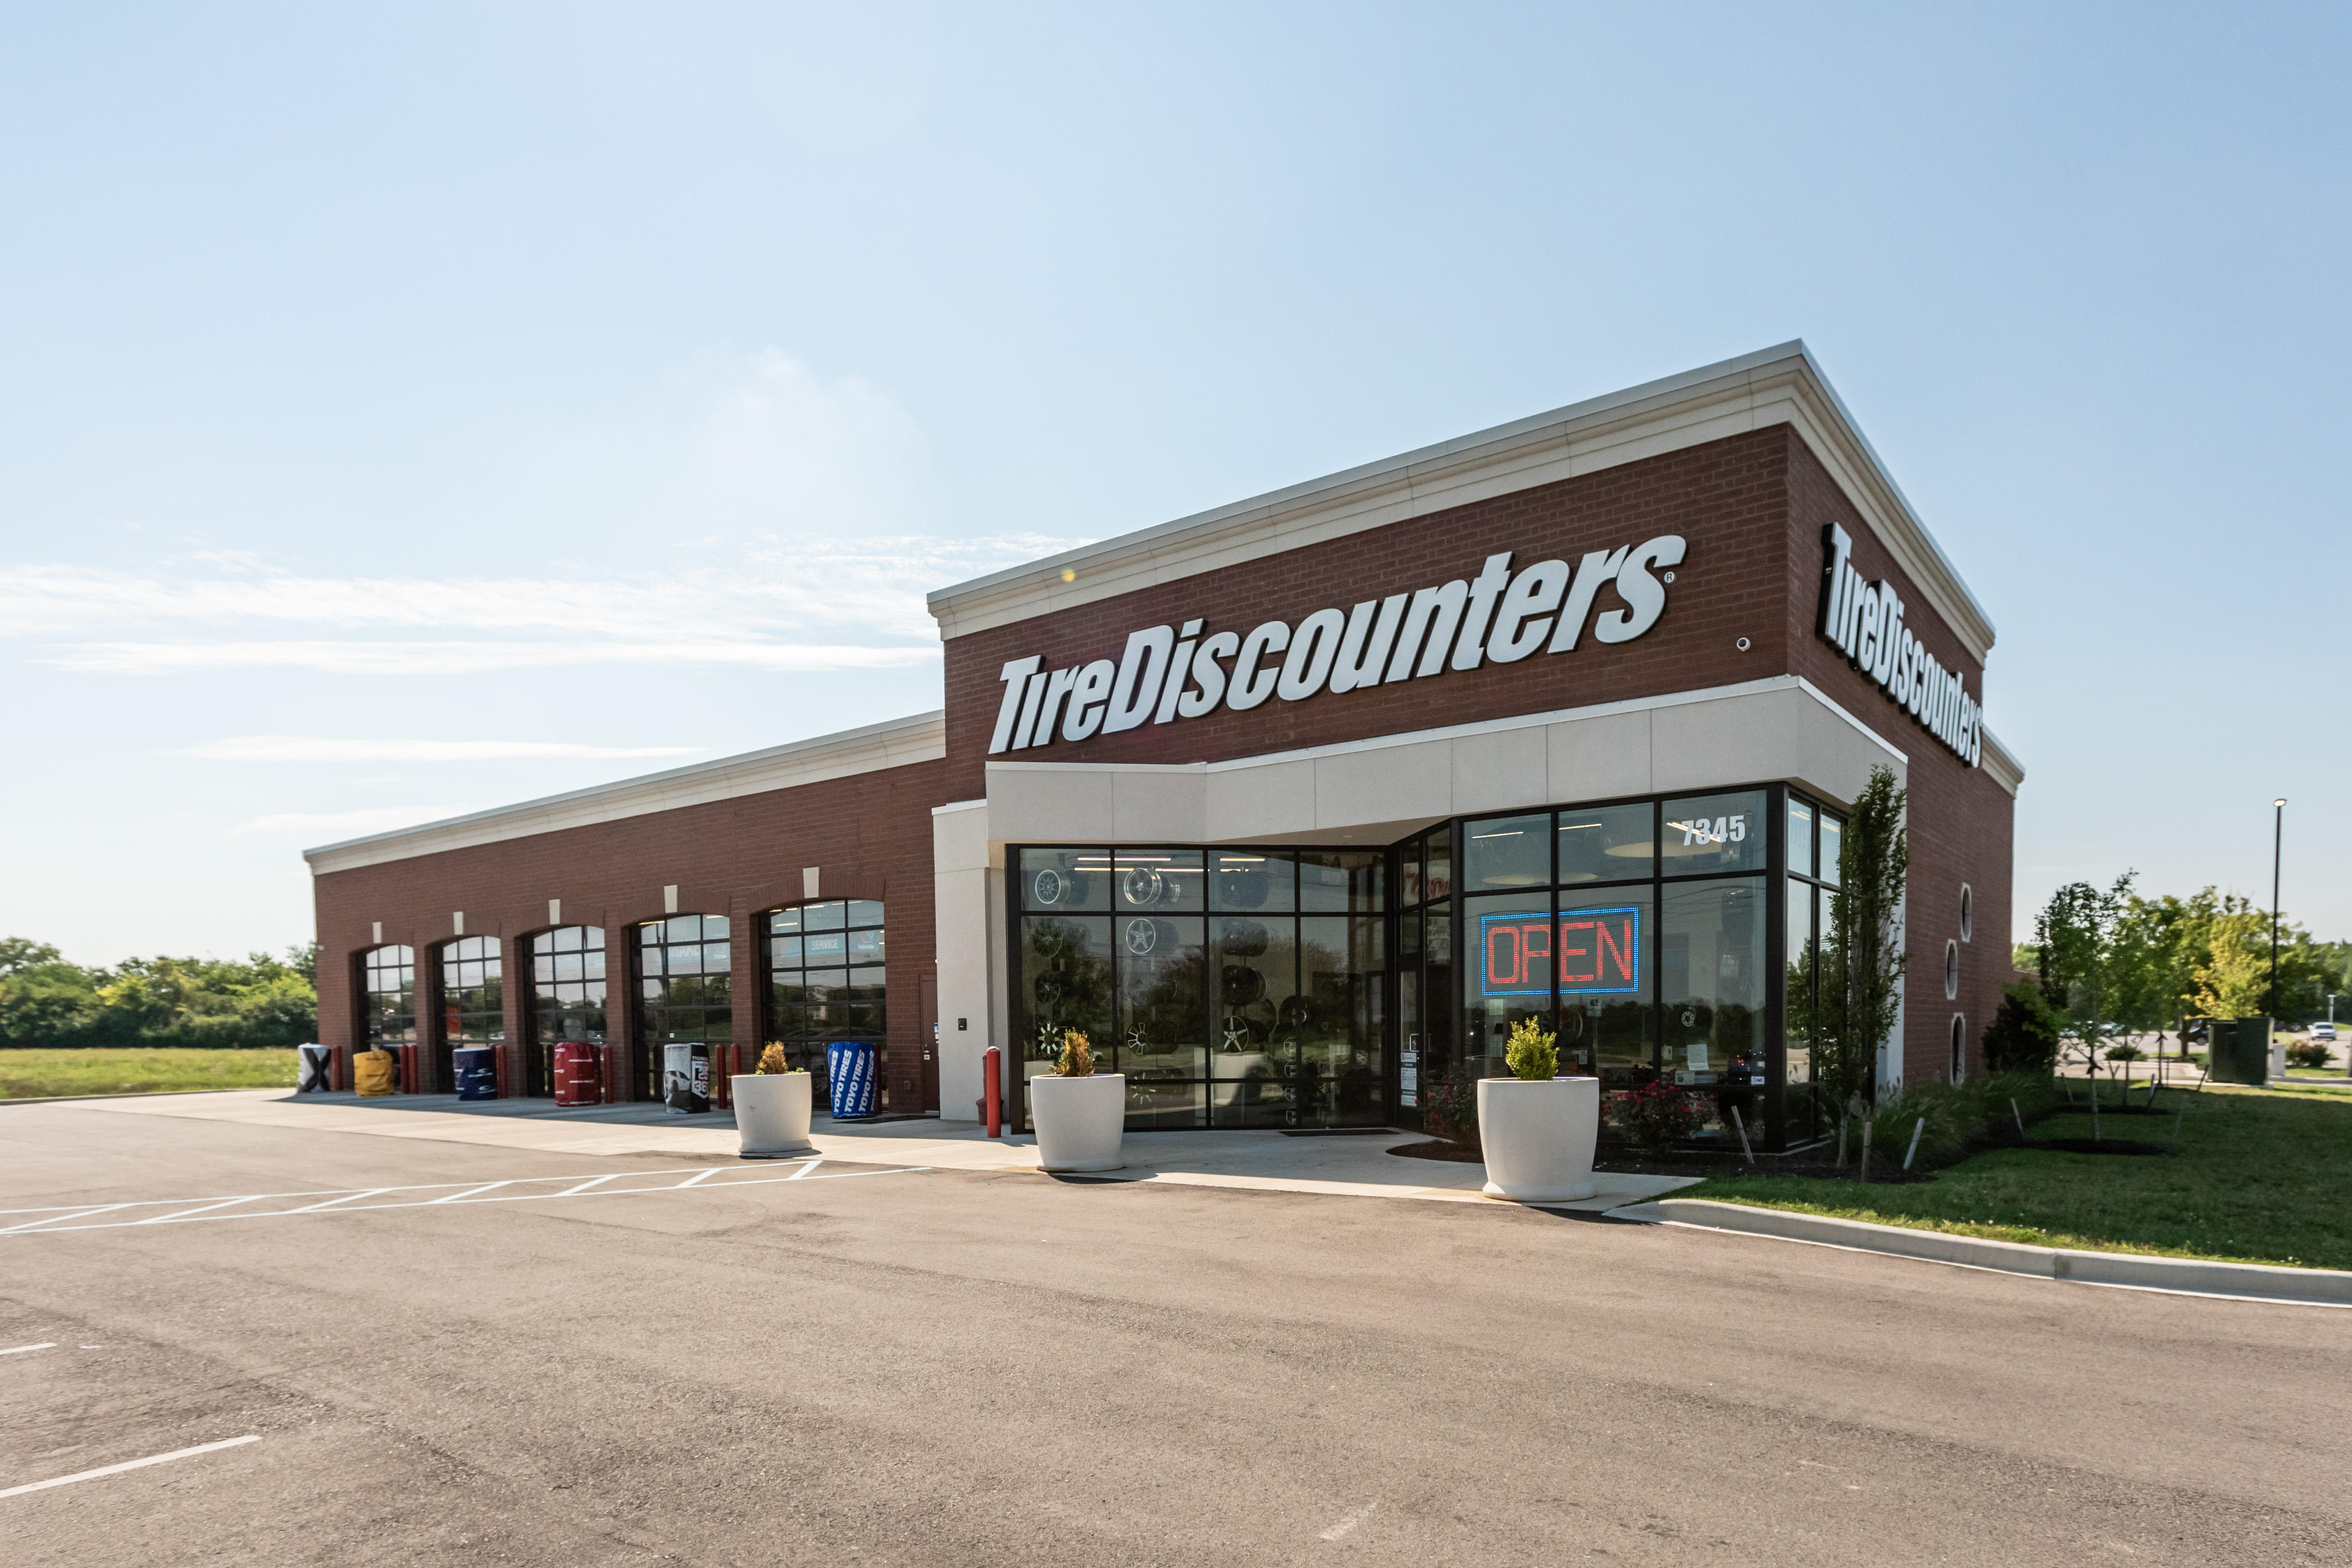 Tire Discounters on 7345 E 96th Street in Indianapolis